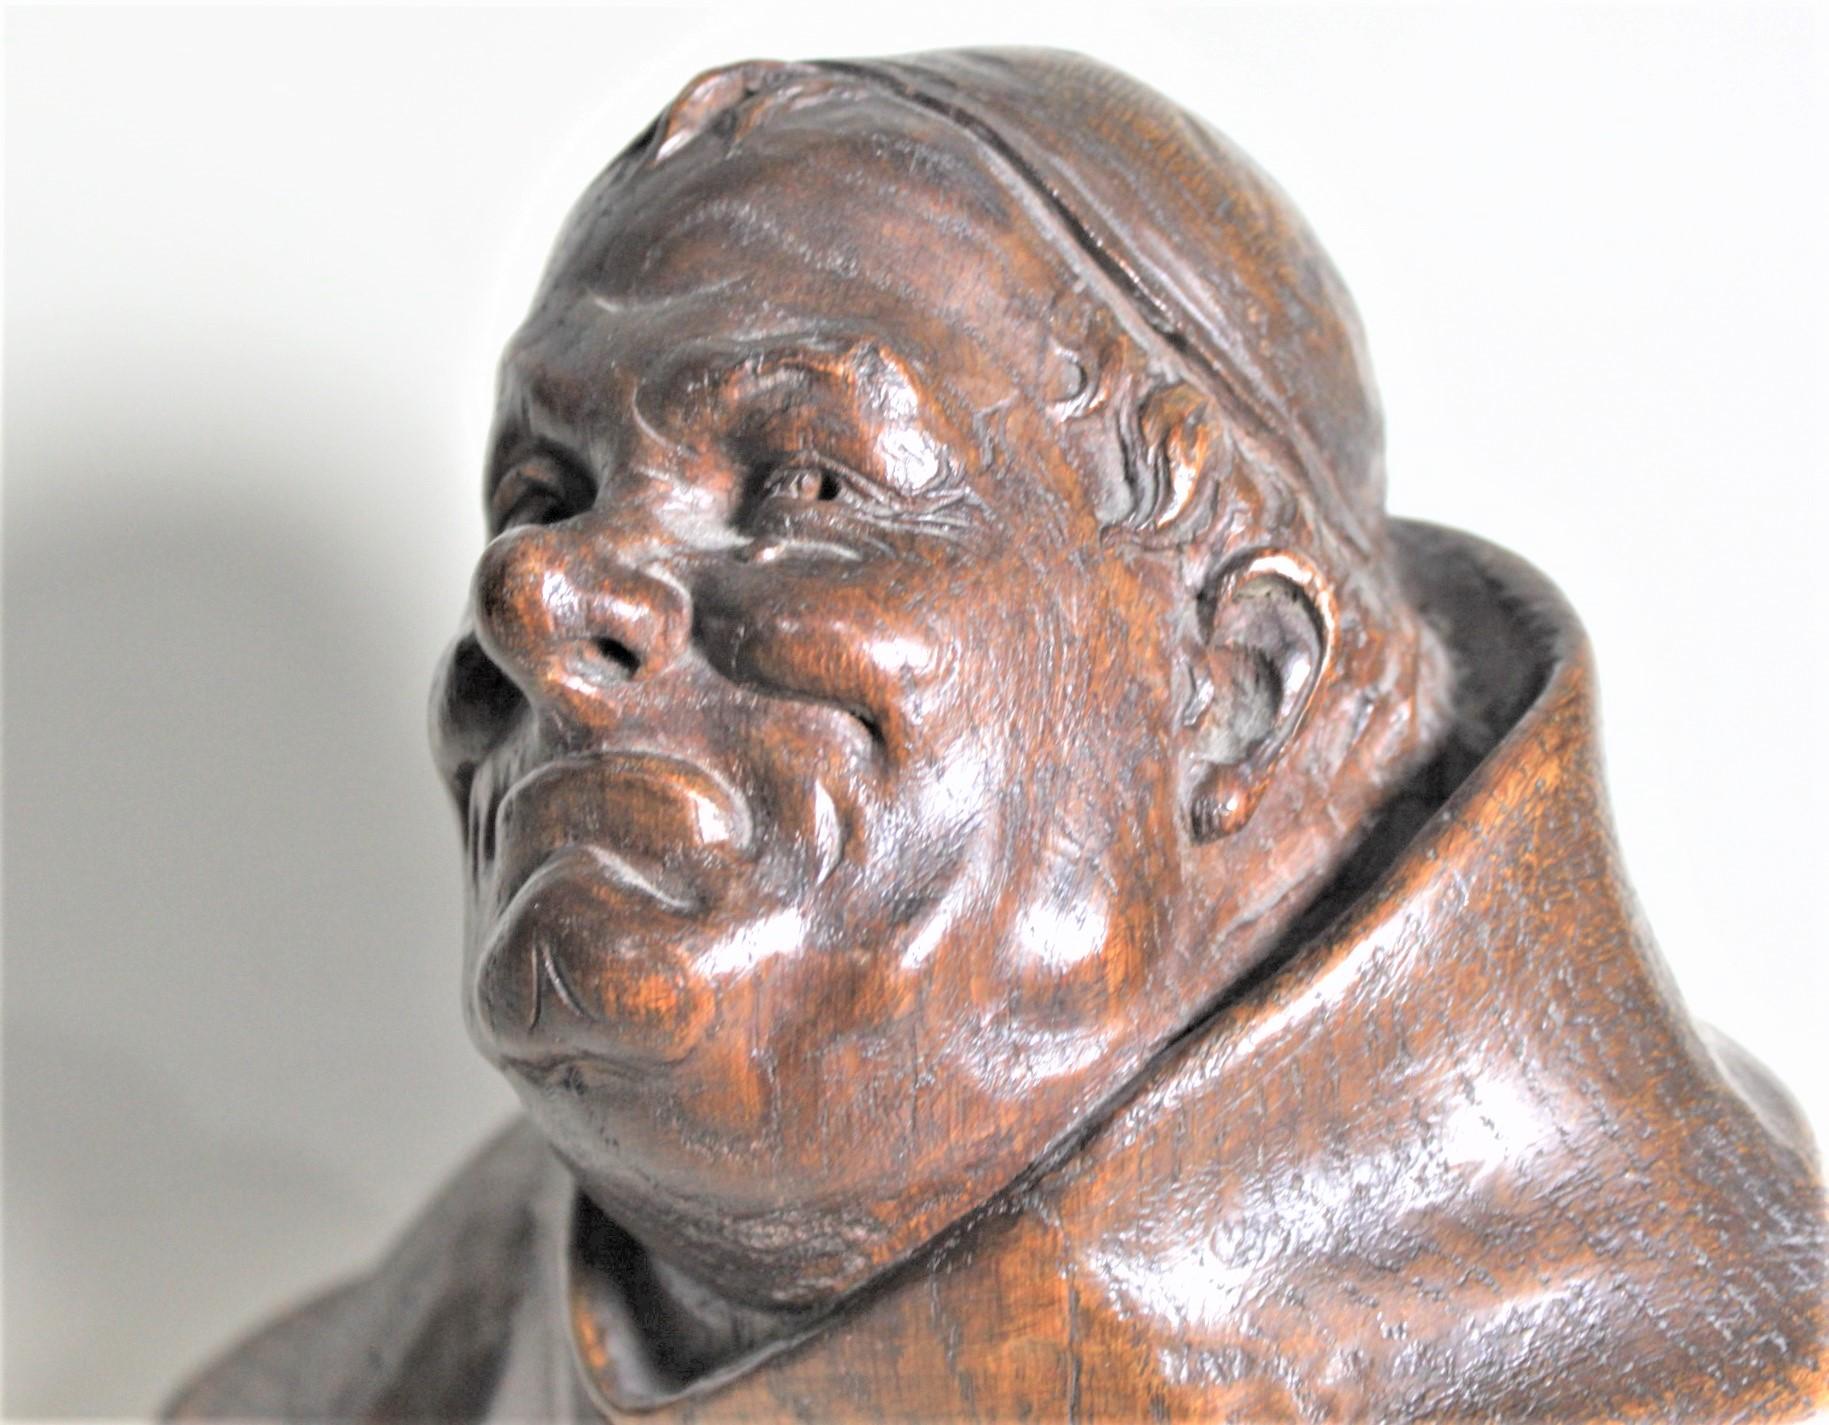 Antique Hand Carved Oak Wood Bust or Sculpture of a Religious Monk or Friar For Sale 3